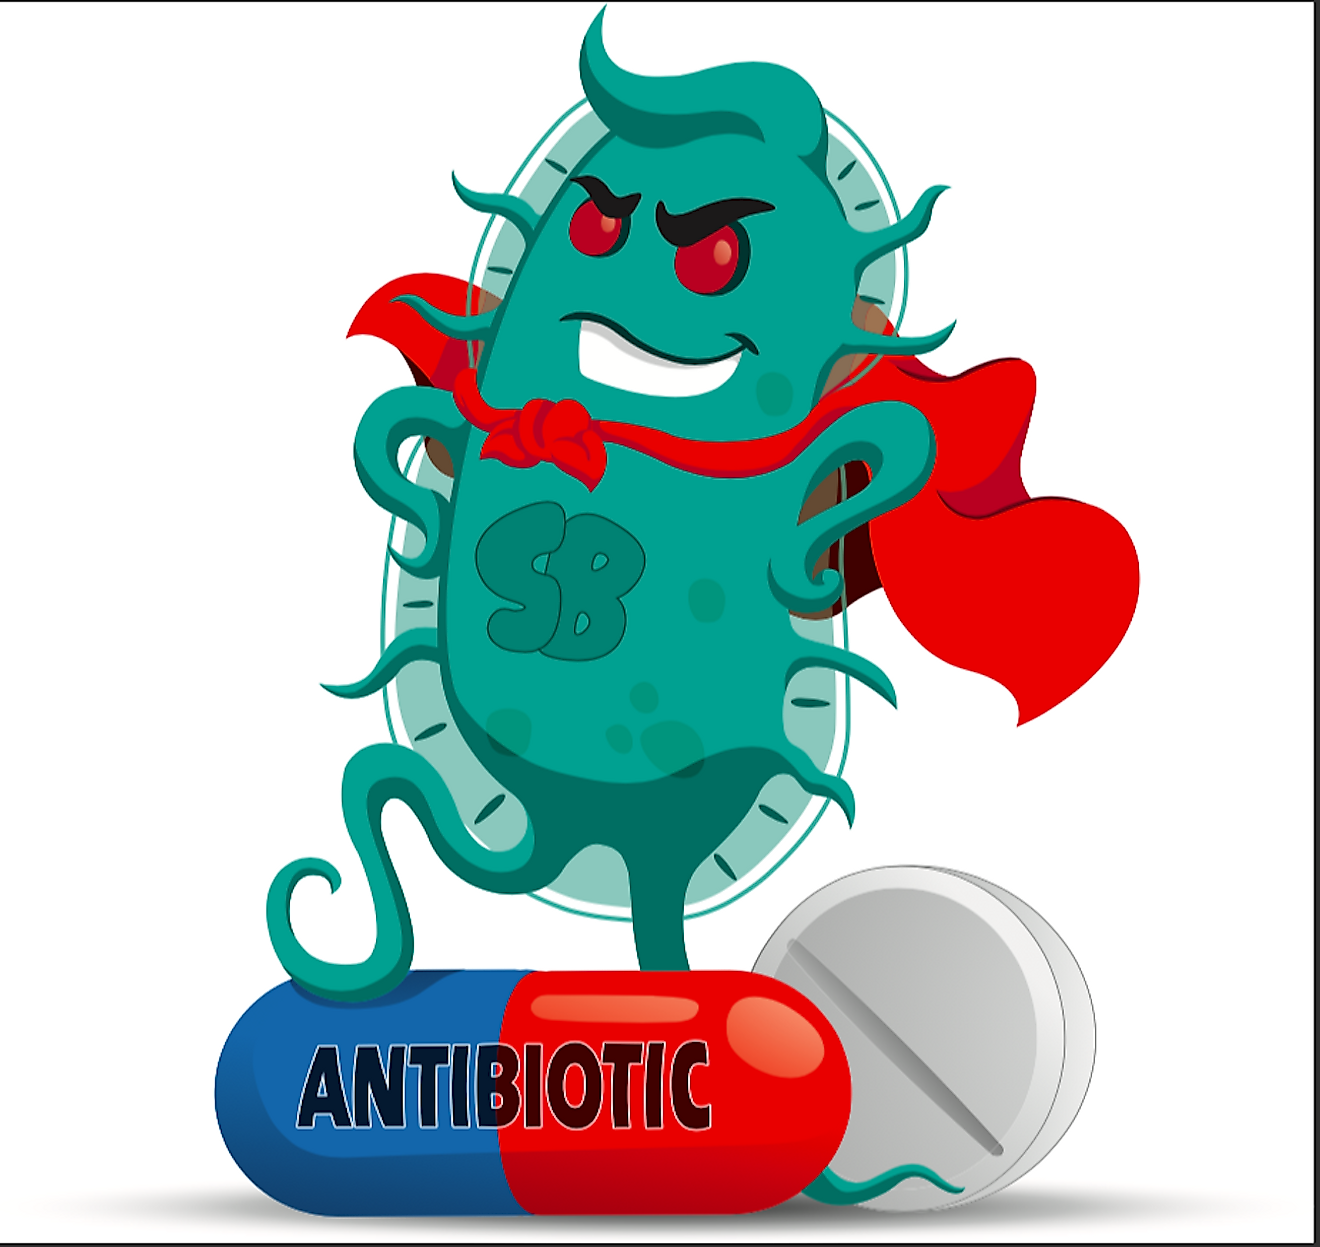 A caricature of a superbug. Image credit: Luciano Cosmo/Shutterstock.com